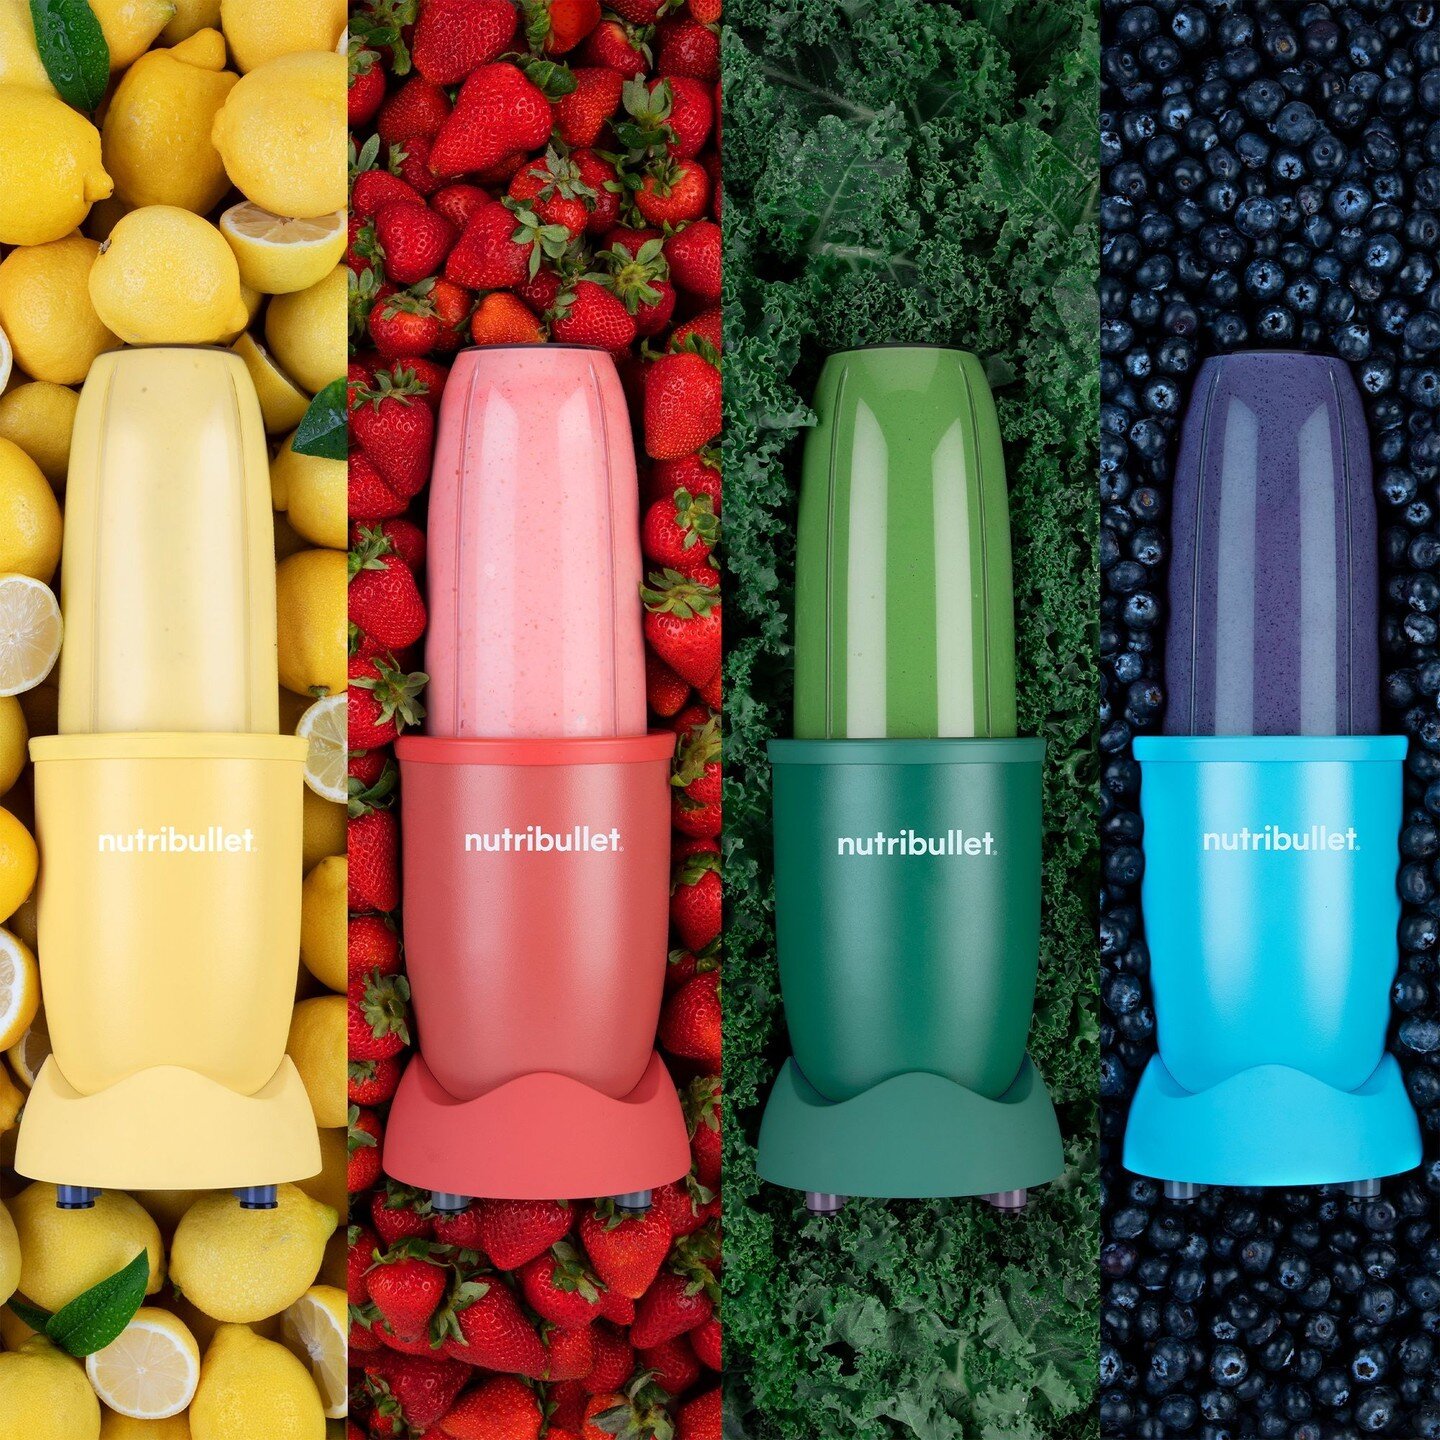 3 DAYS LEFT!⁣
Site-wide spring savings are going strong through Sunday, 4/16! Use code SPRING15 at checkout and save 15% on ANY nutribullet or magic bullet product on nutribullet.com.